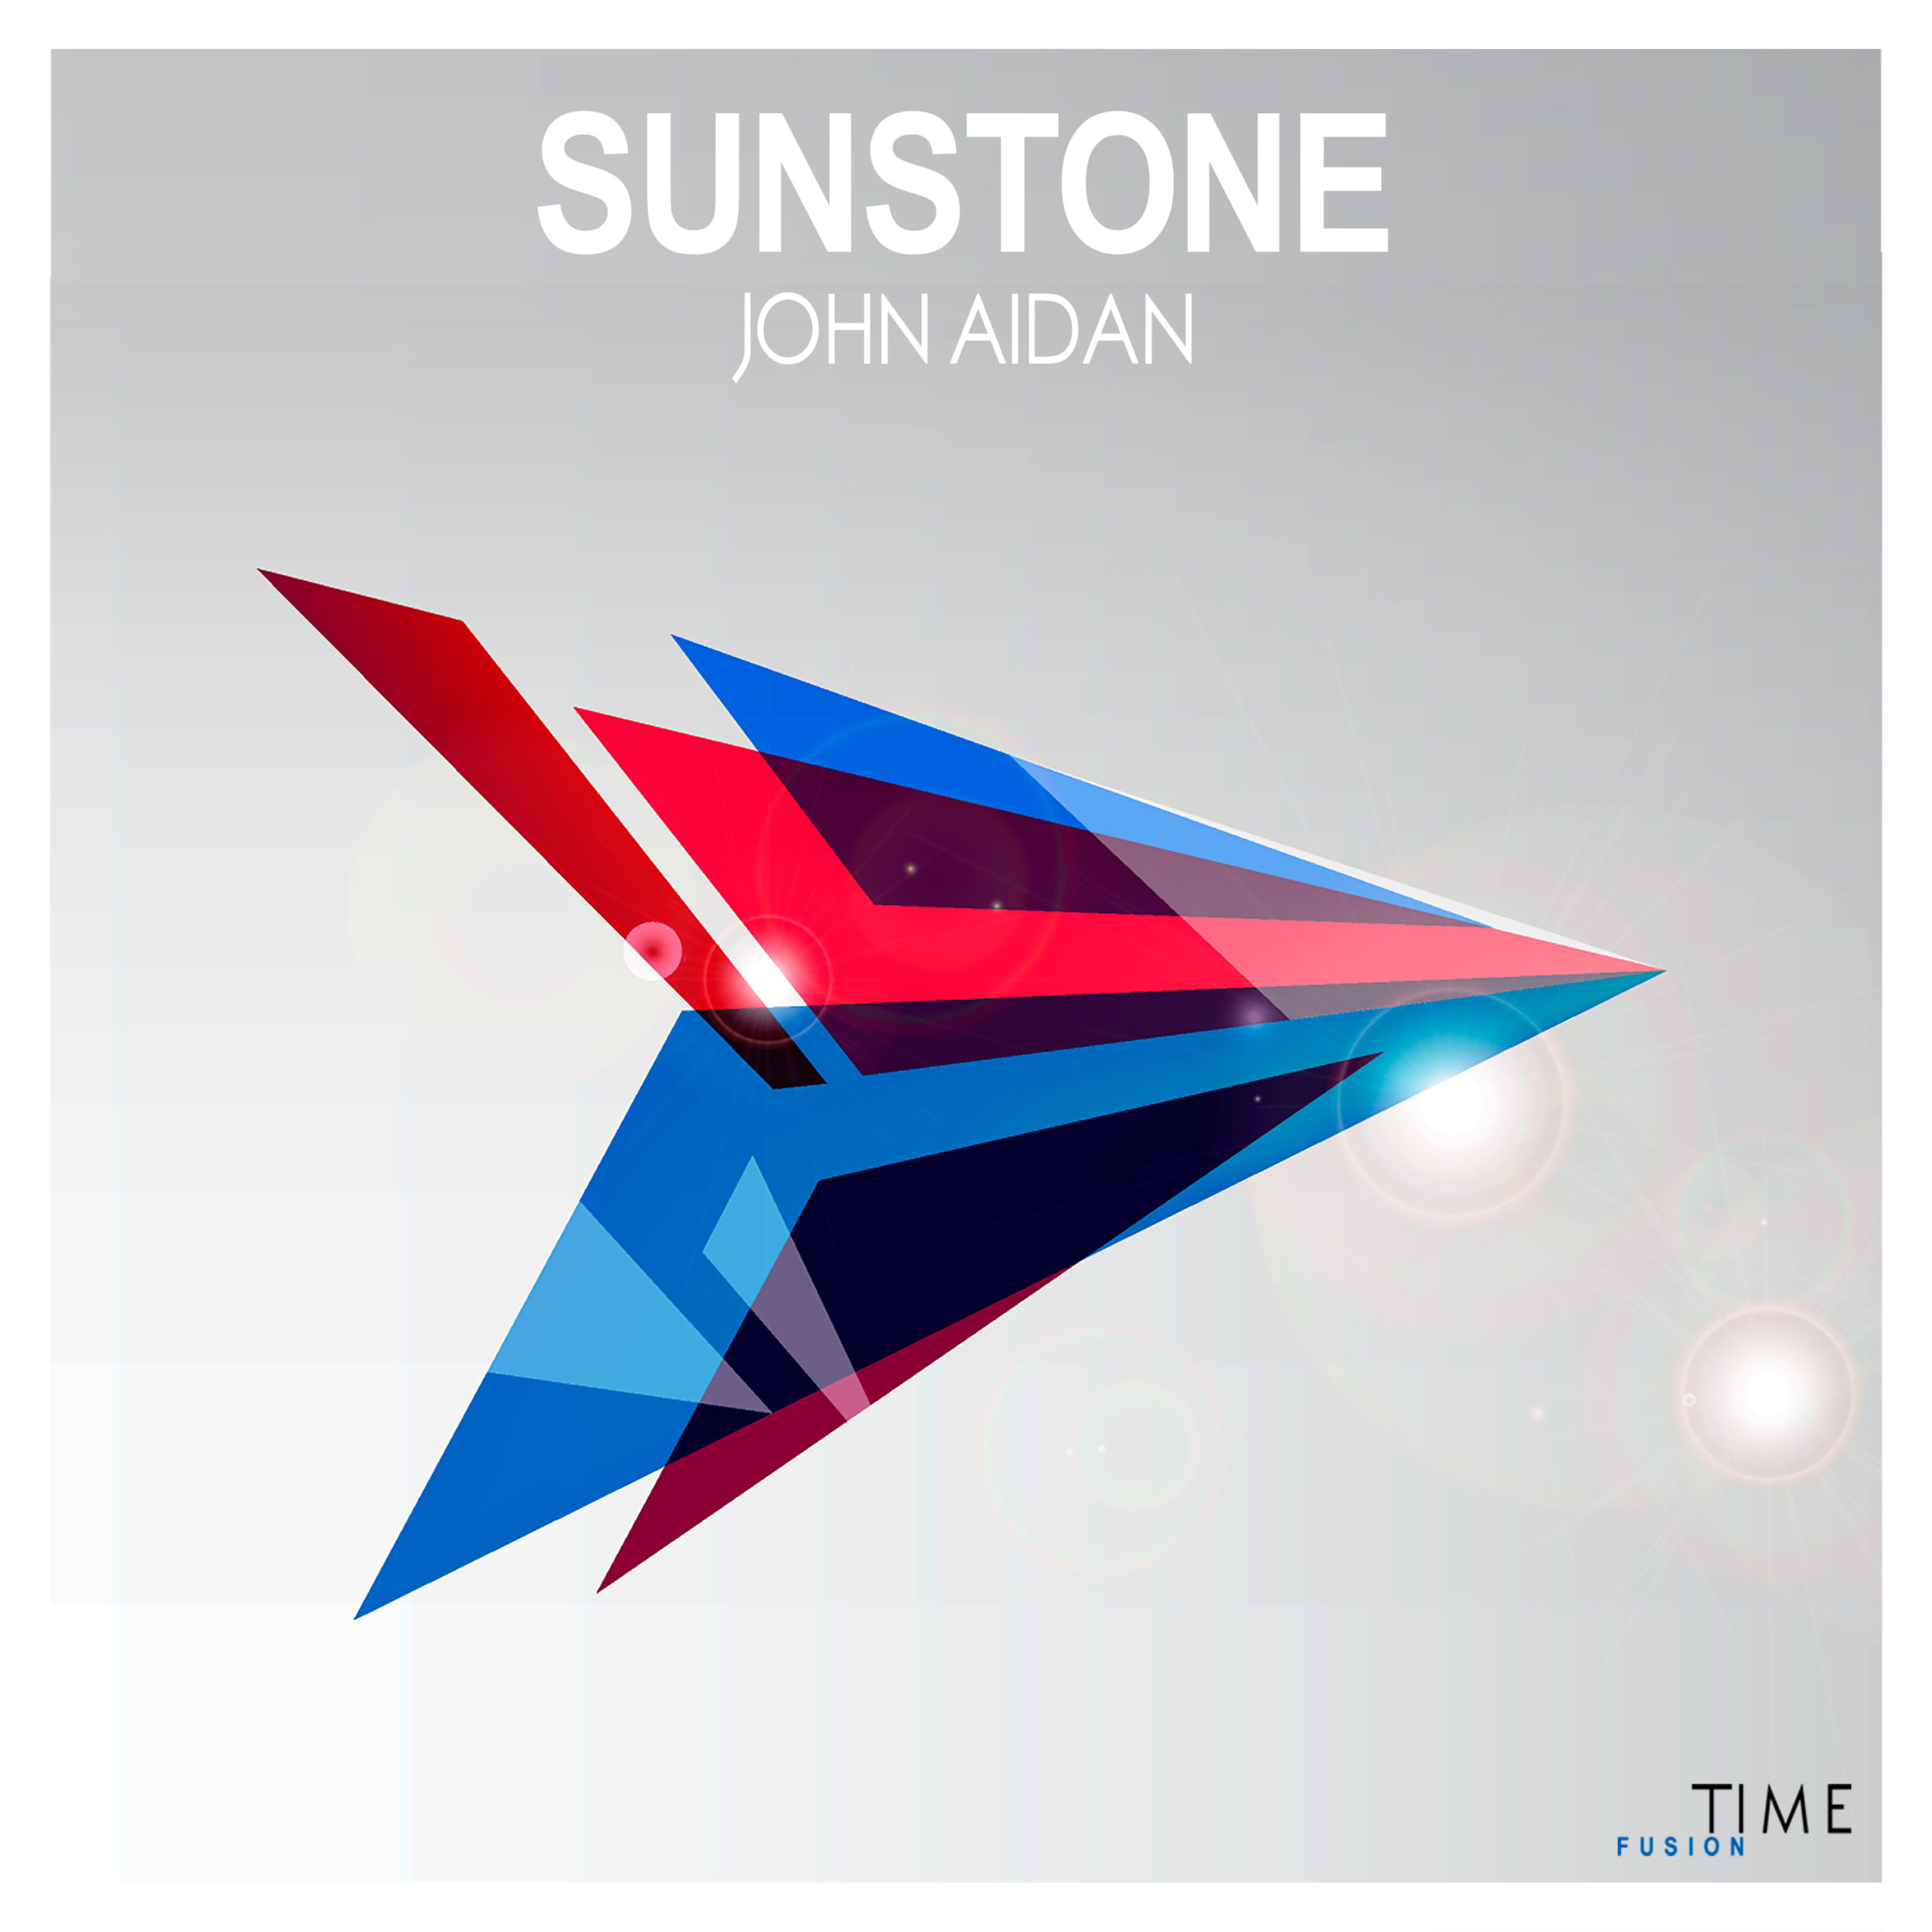 https://www.ultimate-house-records.com/wp-content/uploads/2023/01/John_Aidan-Sunstone_Cover_3000px_web-scaled.jpg